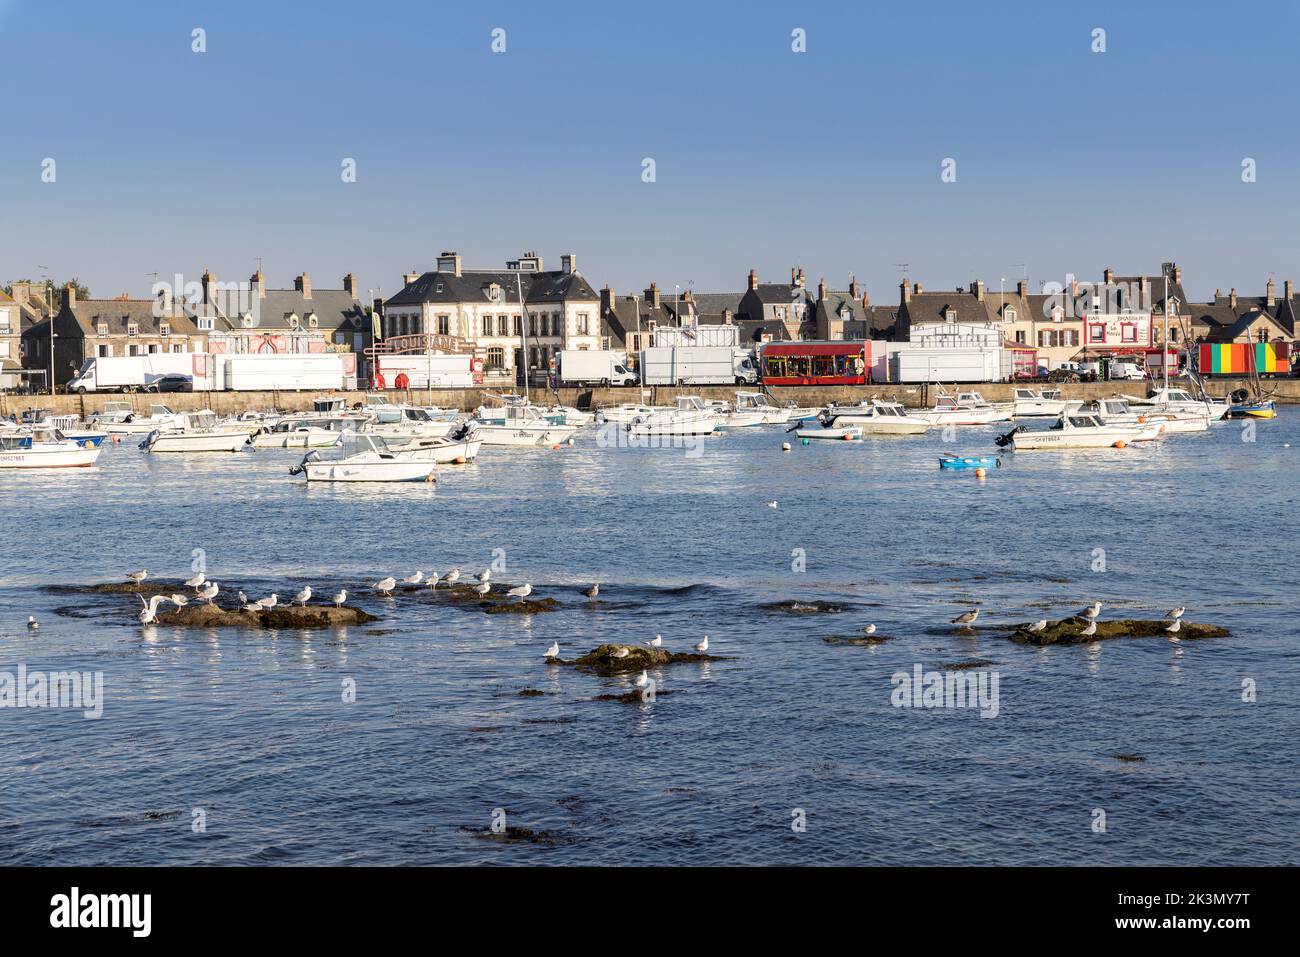 Seagulls, boats and houses at Barfleur, Manche, Normandy, France Stock Photo